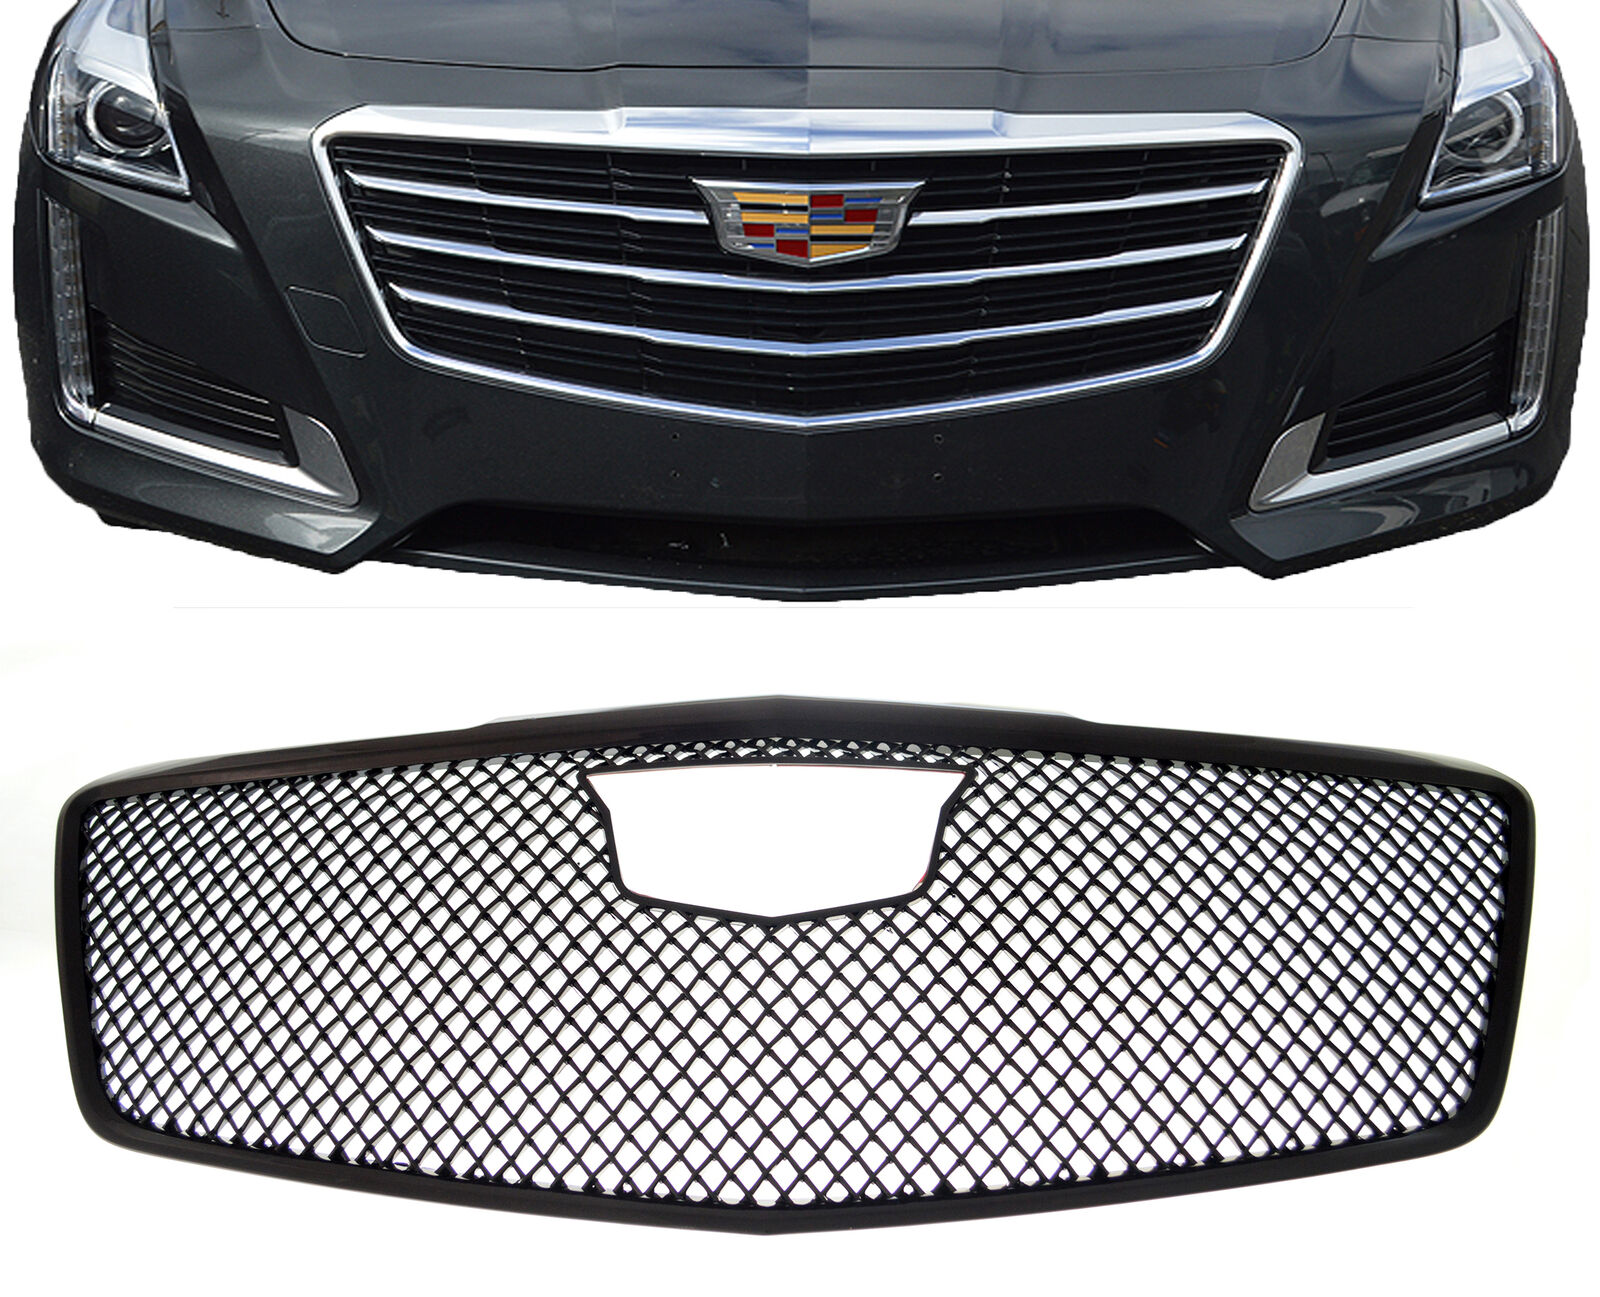 Patented Overlay Black Grille fits 15-19 Cadillac CTS (Not CTS-V)